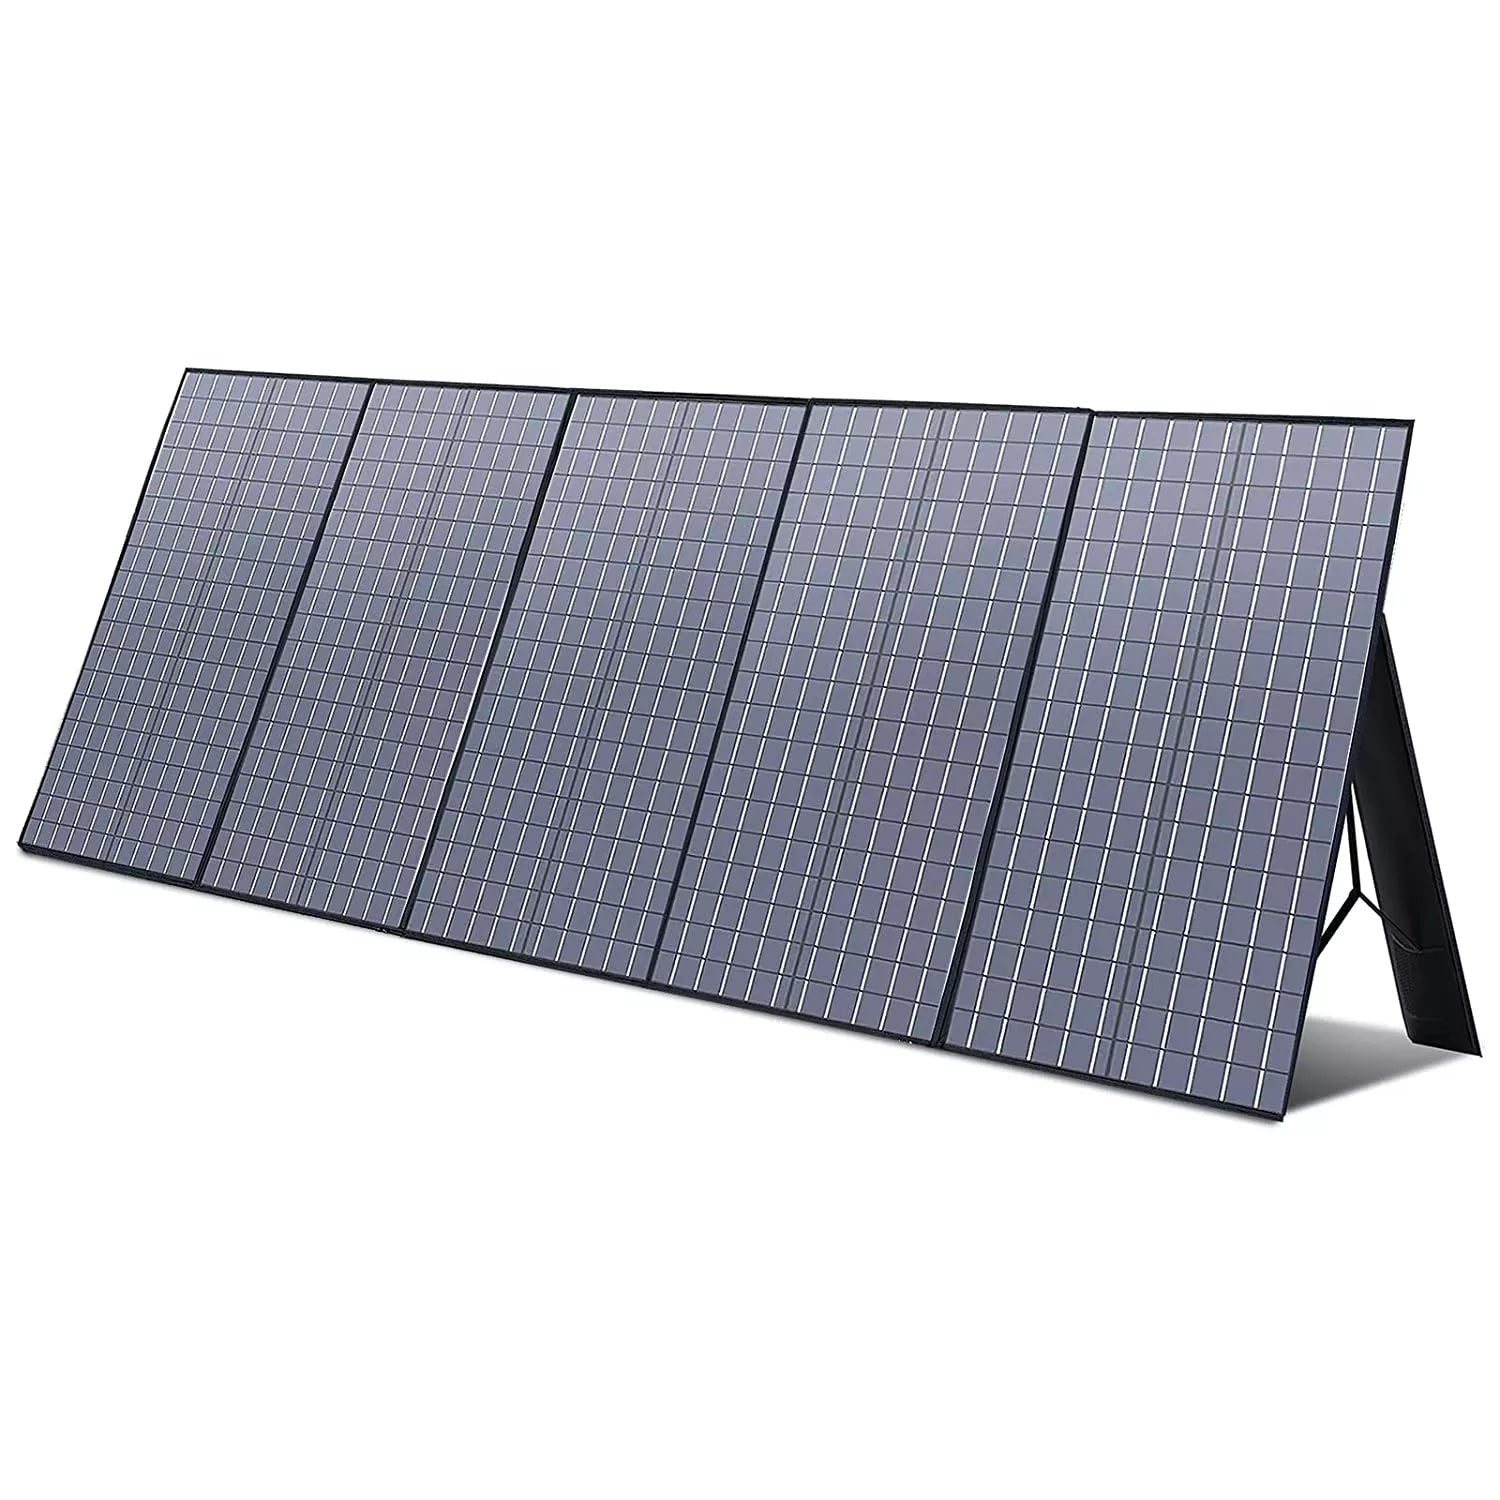 ALLPOWERS Foldable Solar Panel, Foldable solar charger, cables, adapters, manual, and warranty with support.